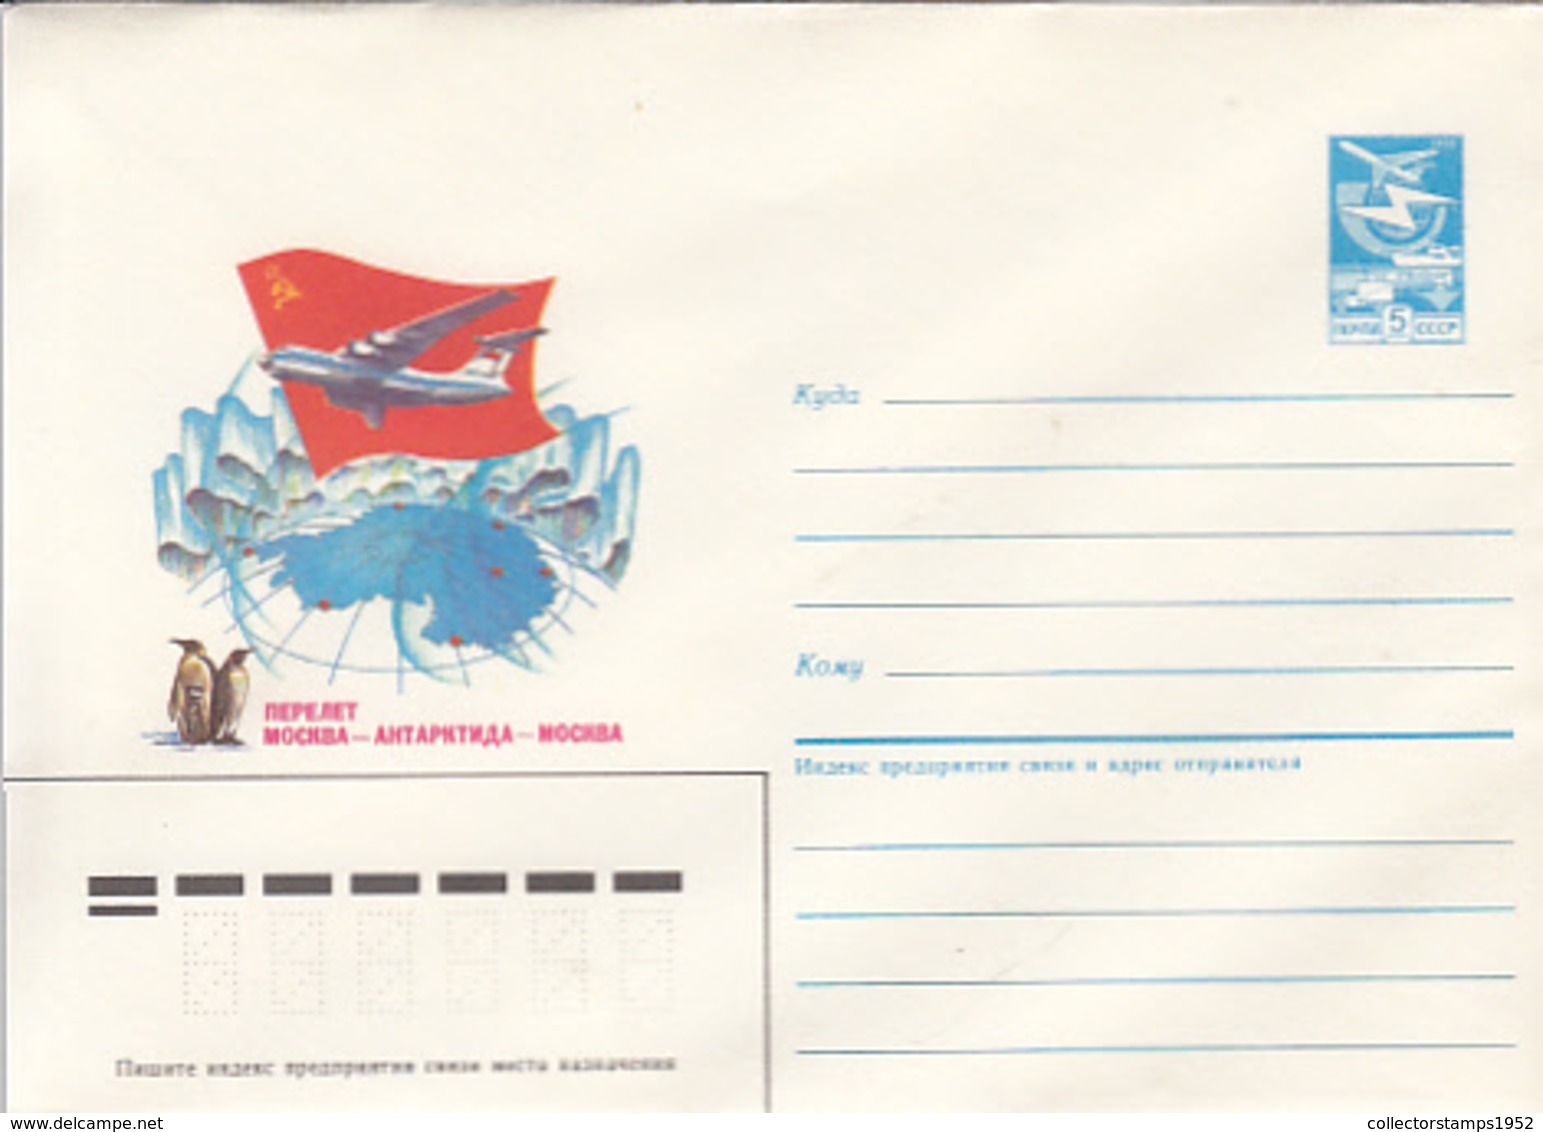 76398- MOSCOW-ANTARCTICA-MOSCOW FLIGHT, PLANE, PENGUINS, POLAR FLIGHTS, COVER STATIONERY, 1986, RUSSIA-USSR - Vols Polaires